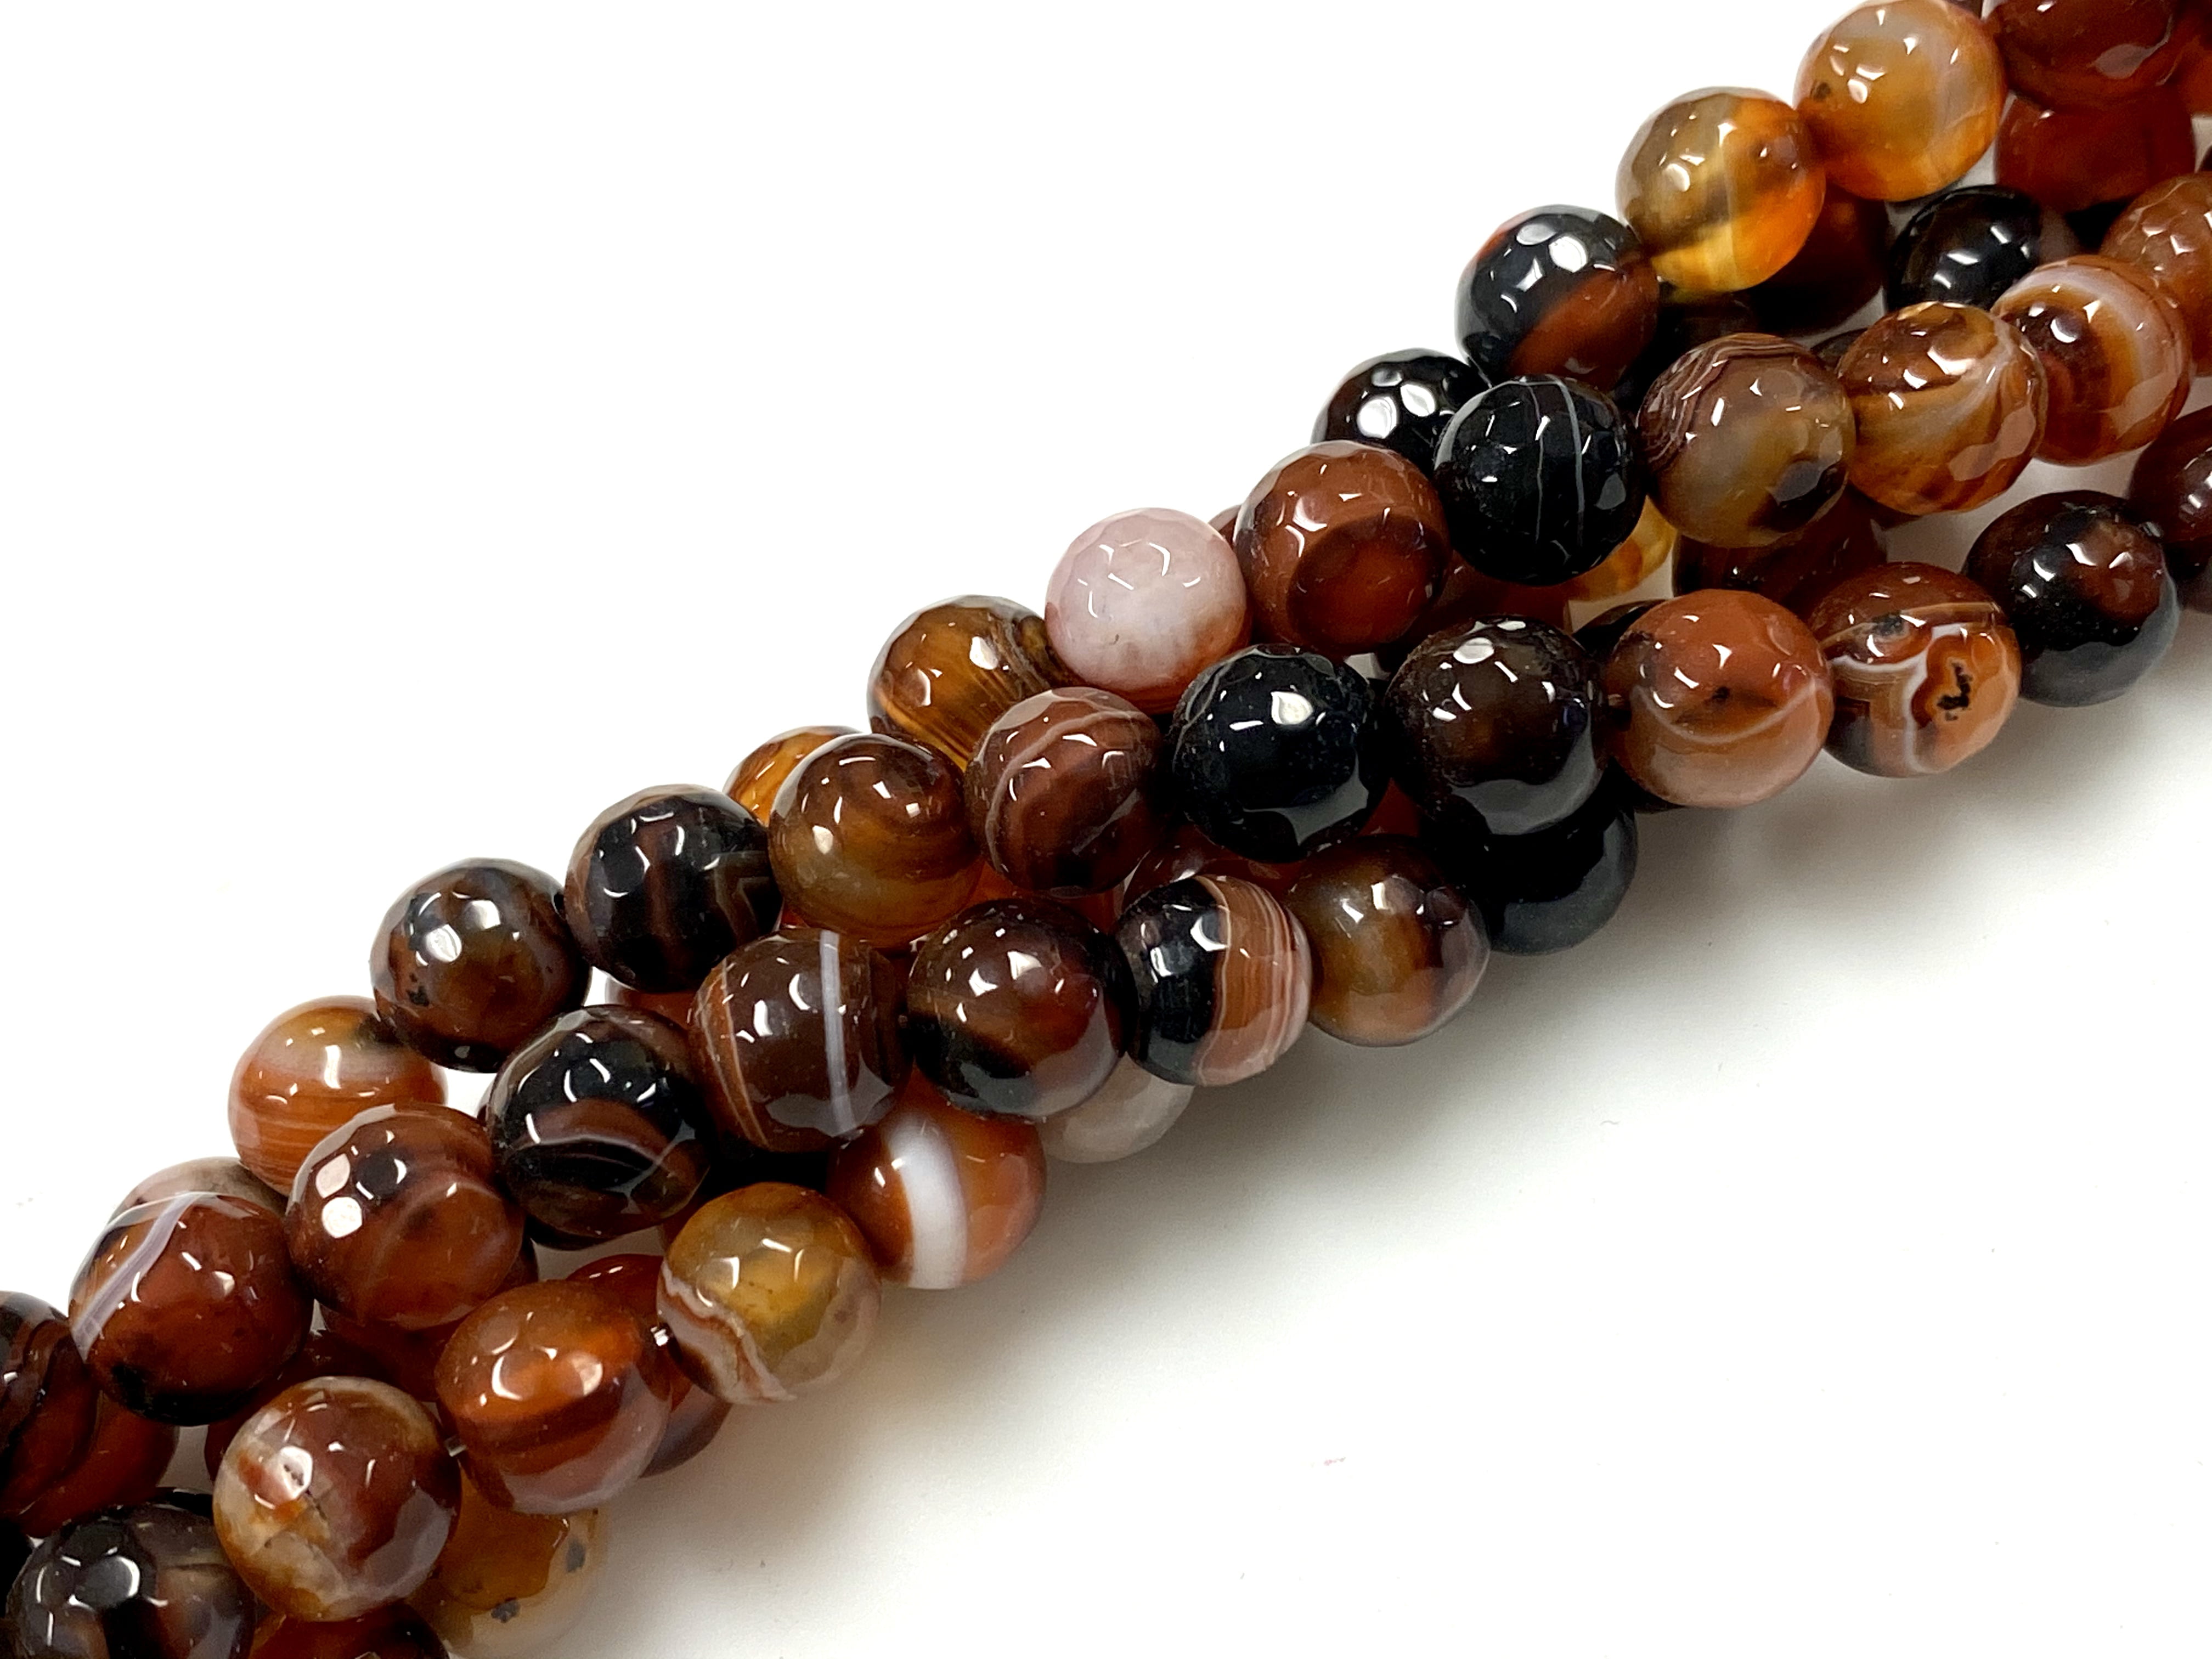 Round Faceted Orange Jade Stone For Jewelry Making Loose Beads Strand 15" Gems 